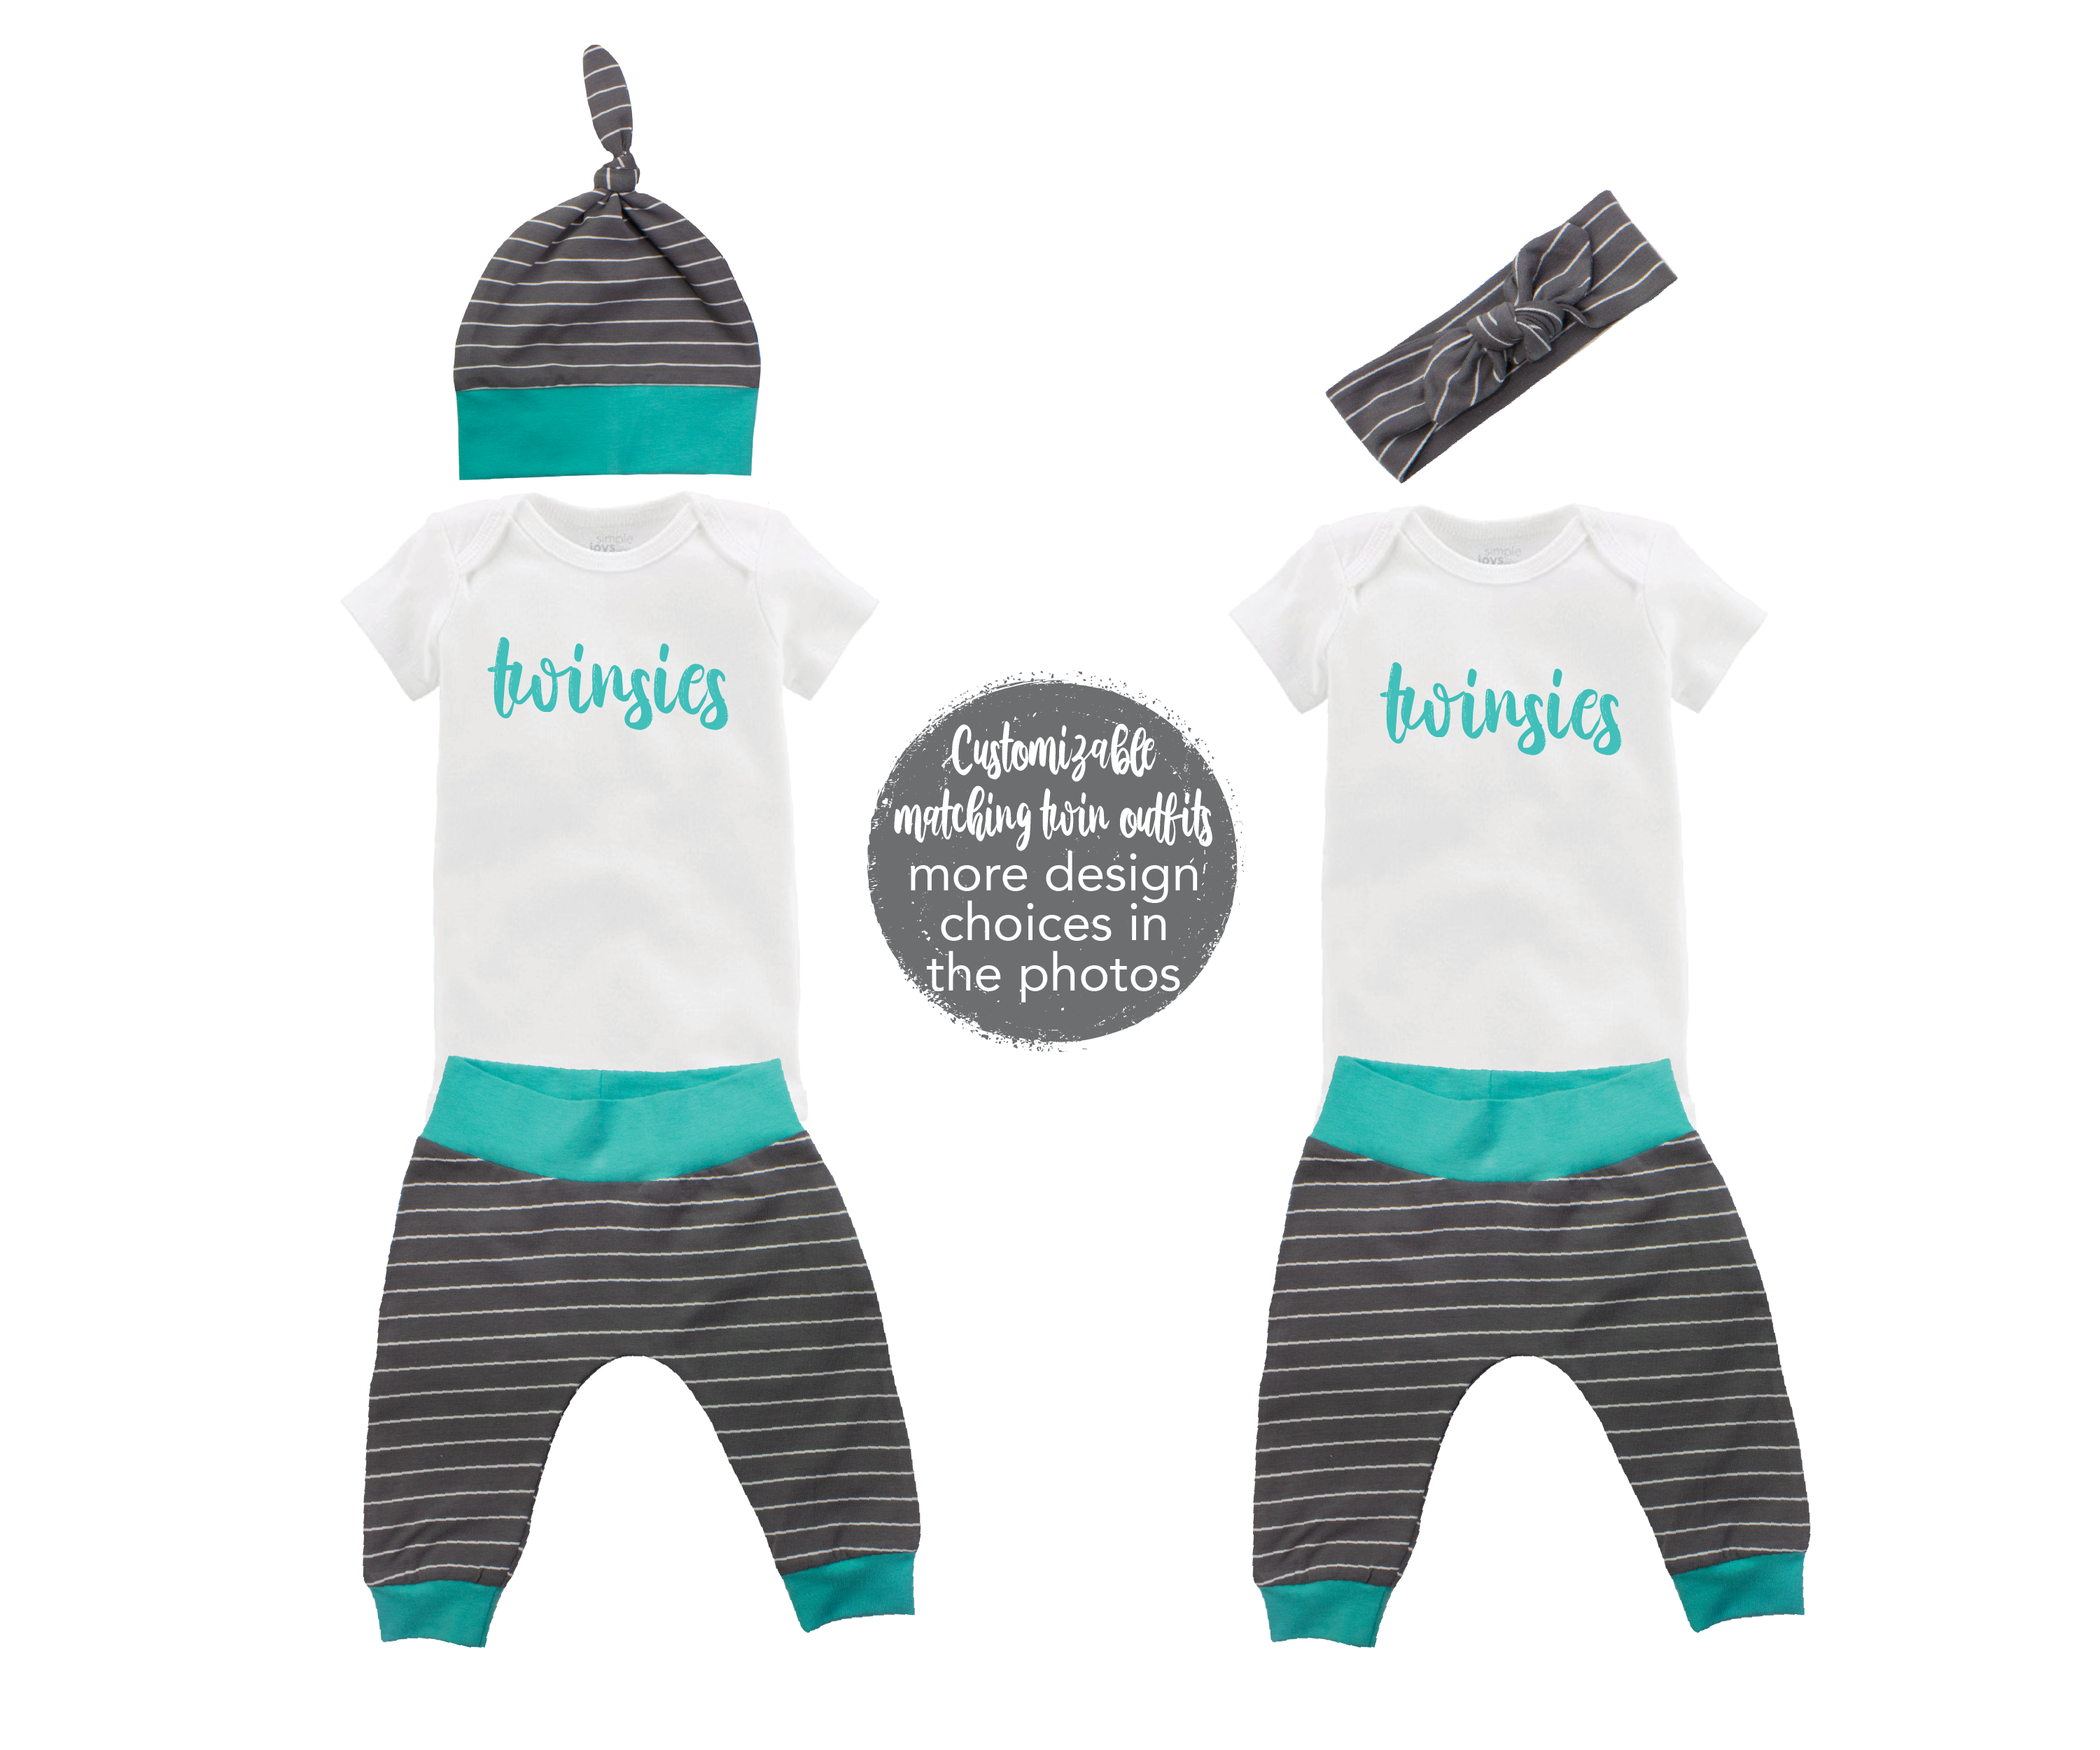 Sometimes Miracles Come in Pairs Twin Unisex Gray Stripe Teal Outfit Dynamic Duo Oldest Youngest Friends Forever Baby Coming Home Outfit